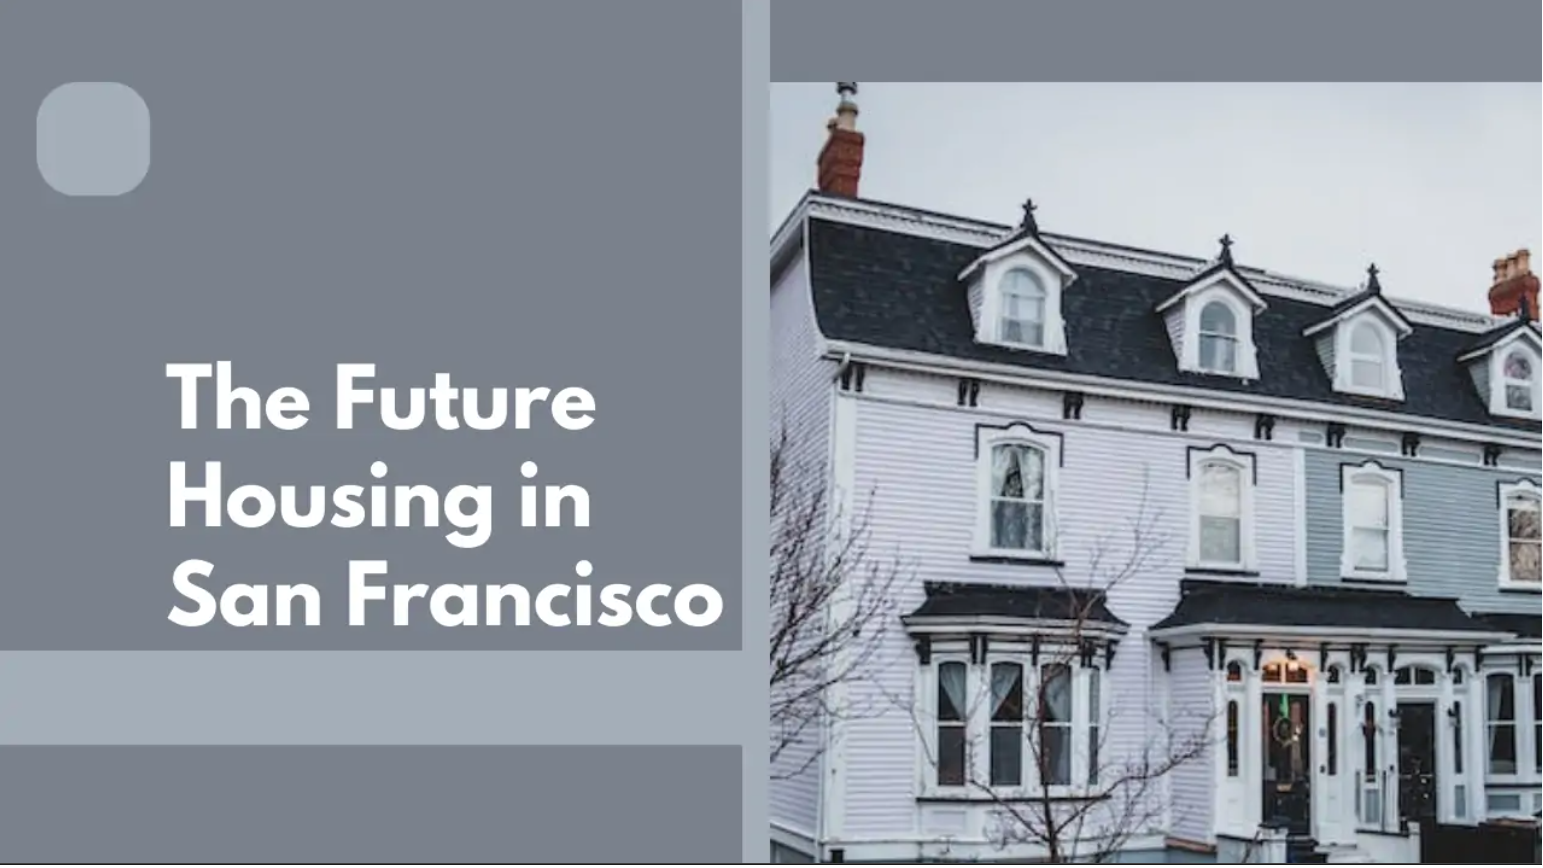 The Future Housing in San Francisco